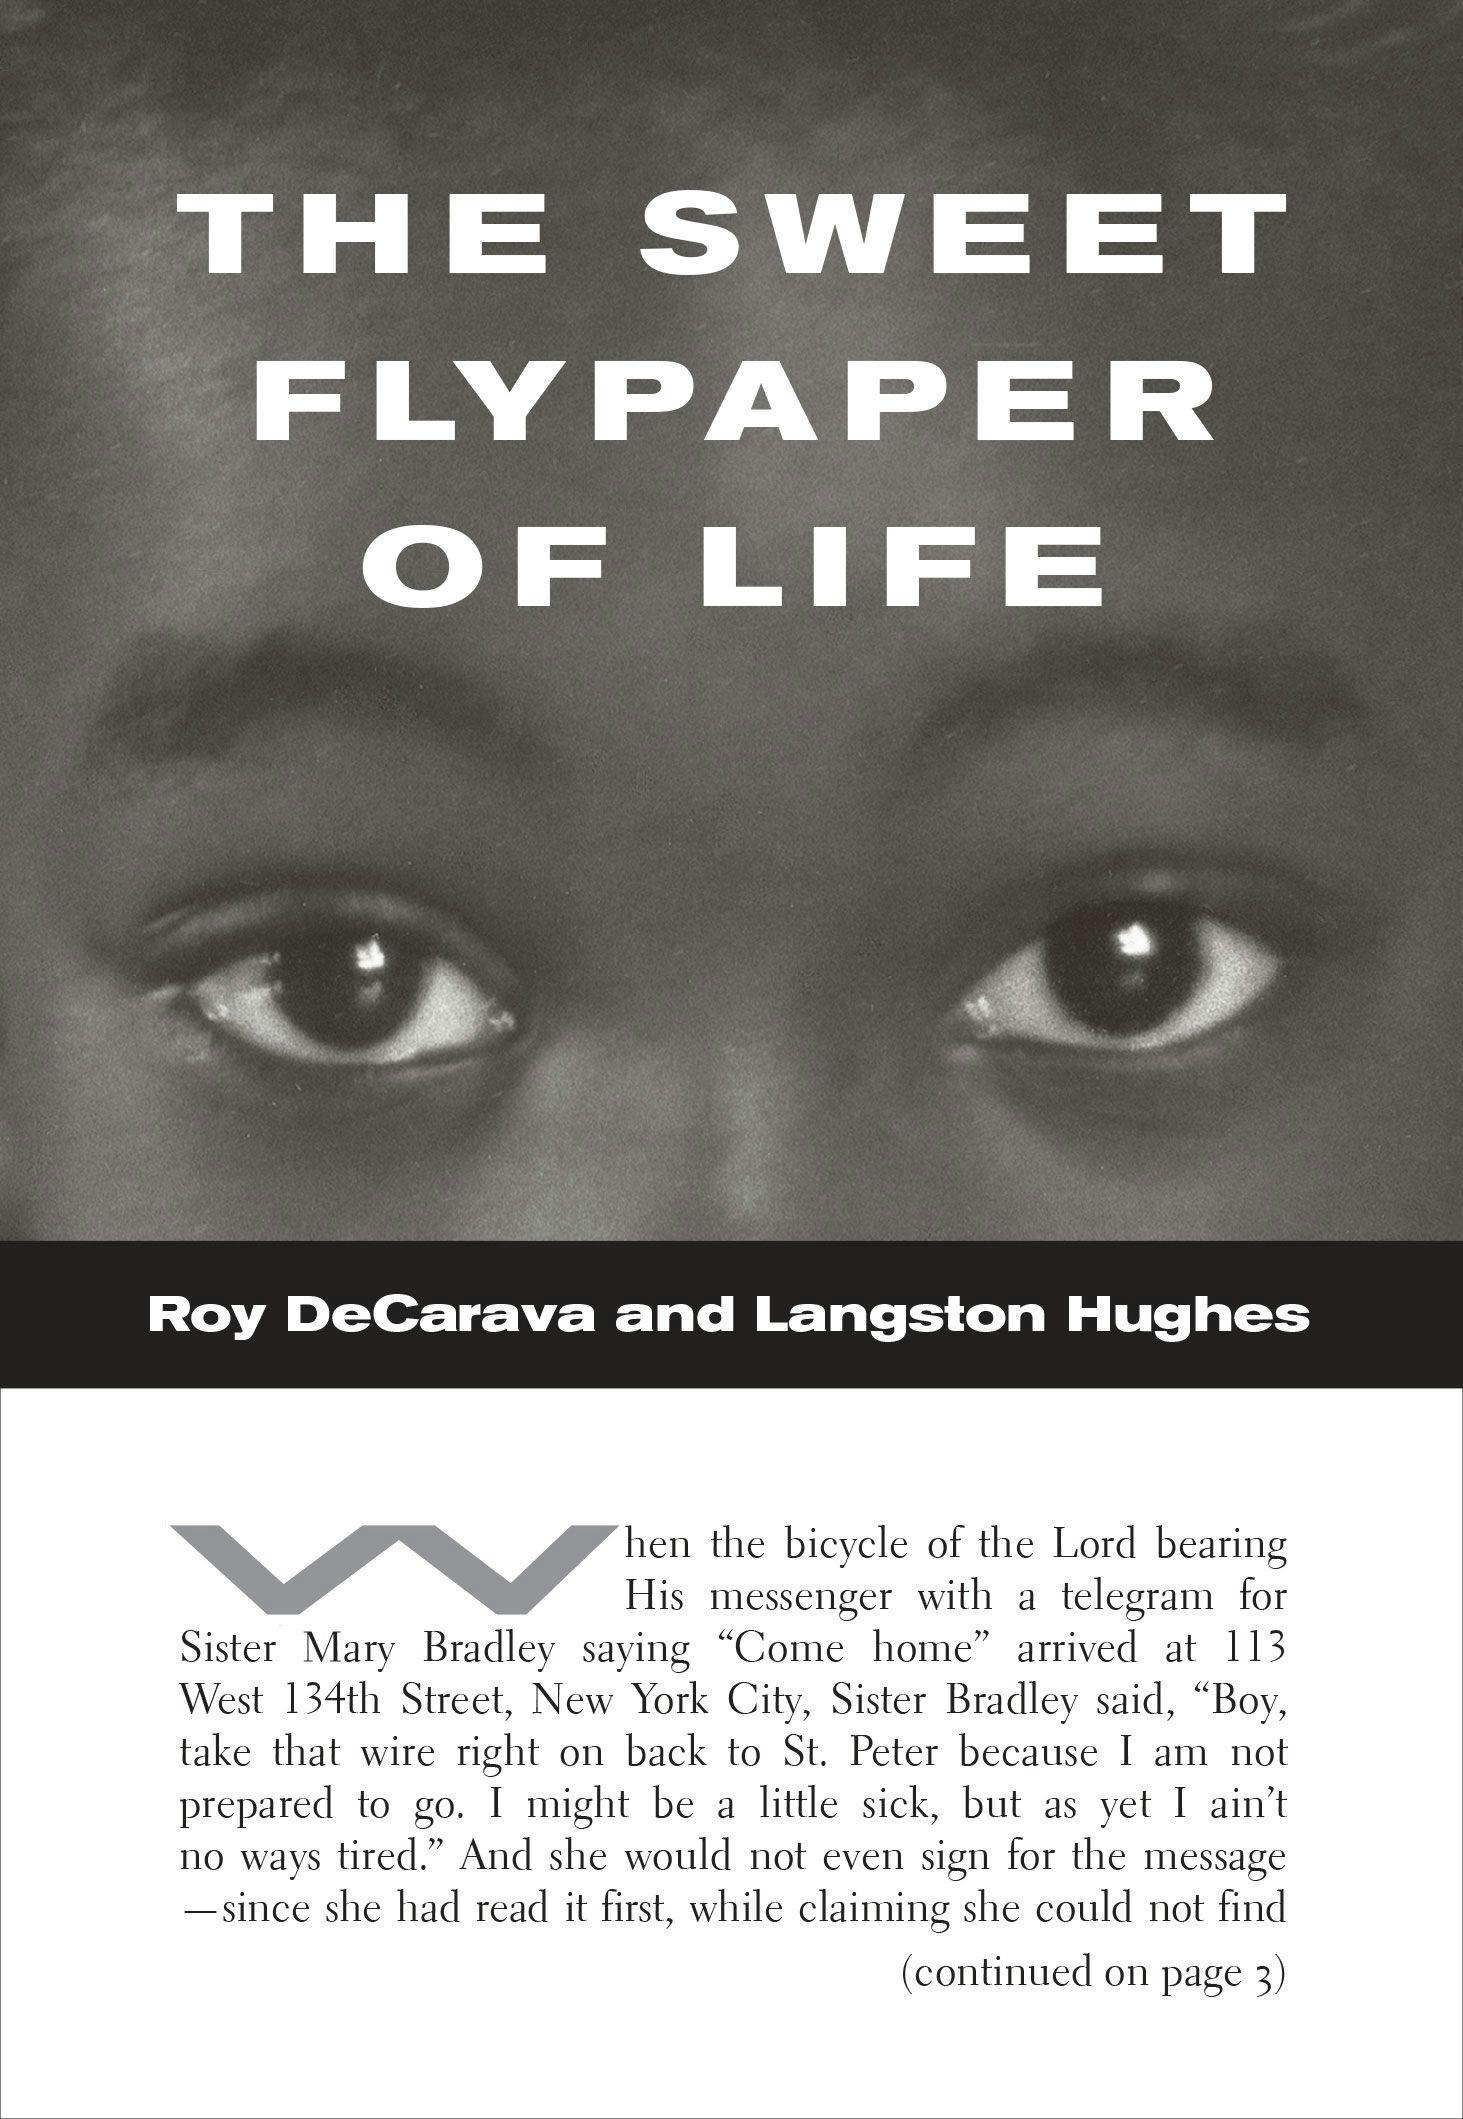 The cover of a book, titled The Sweet Flypaper of Life.